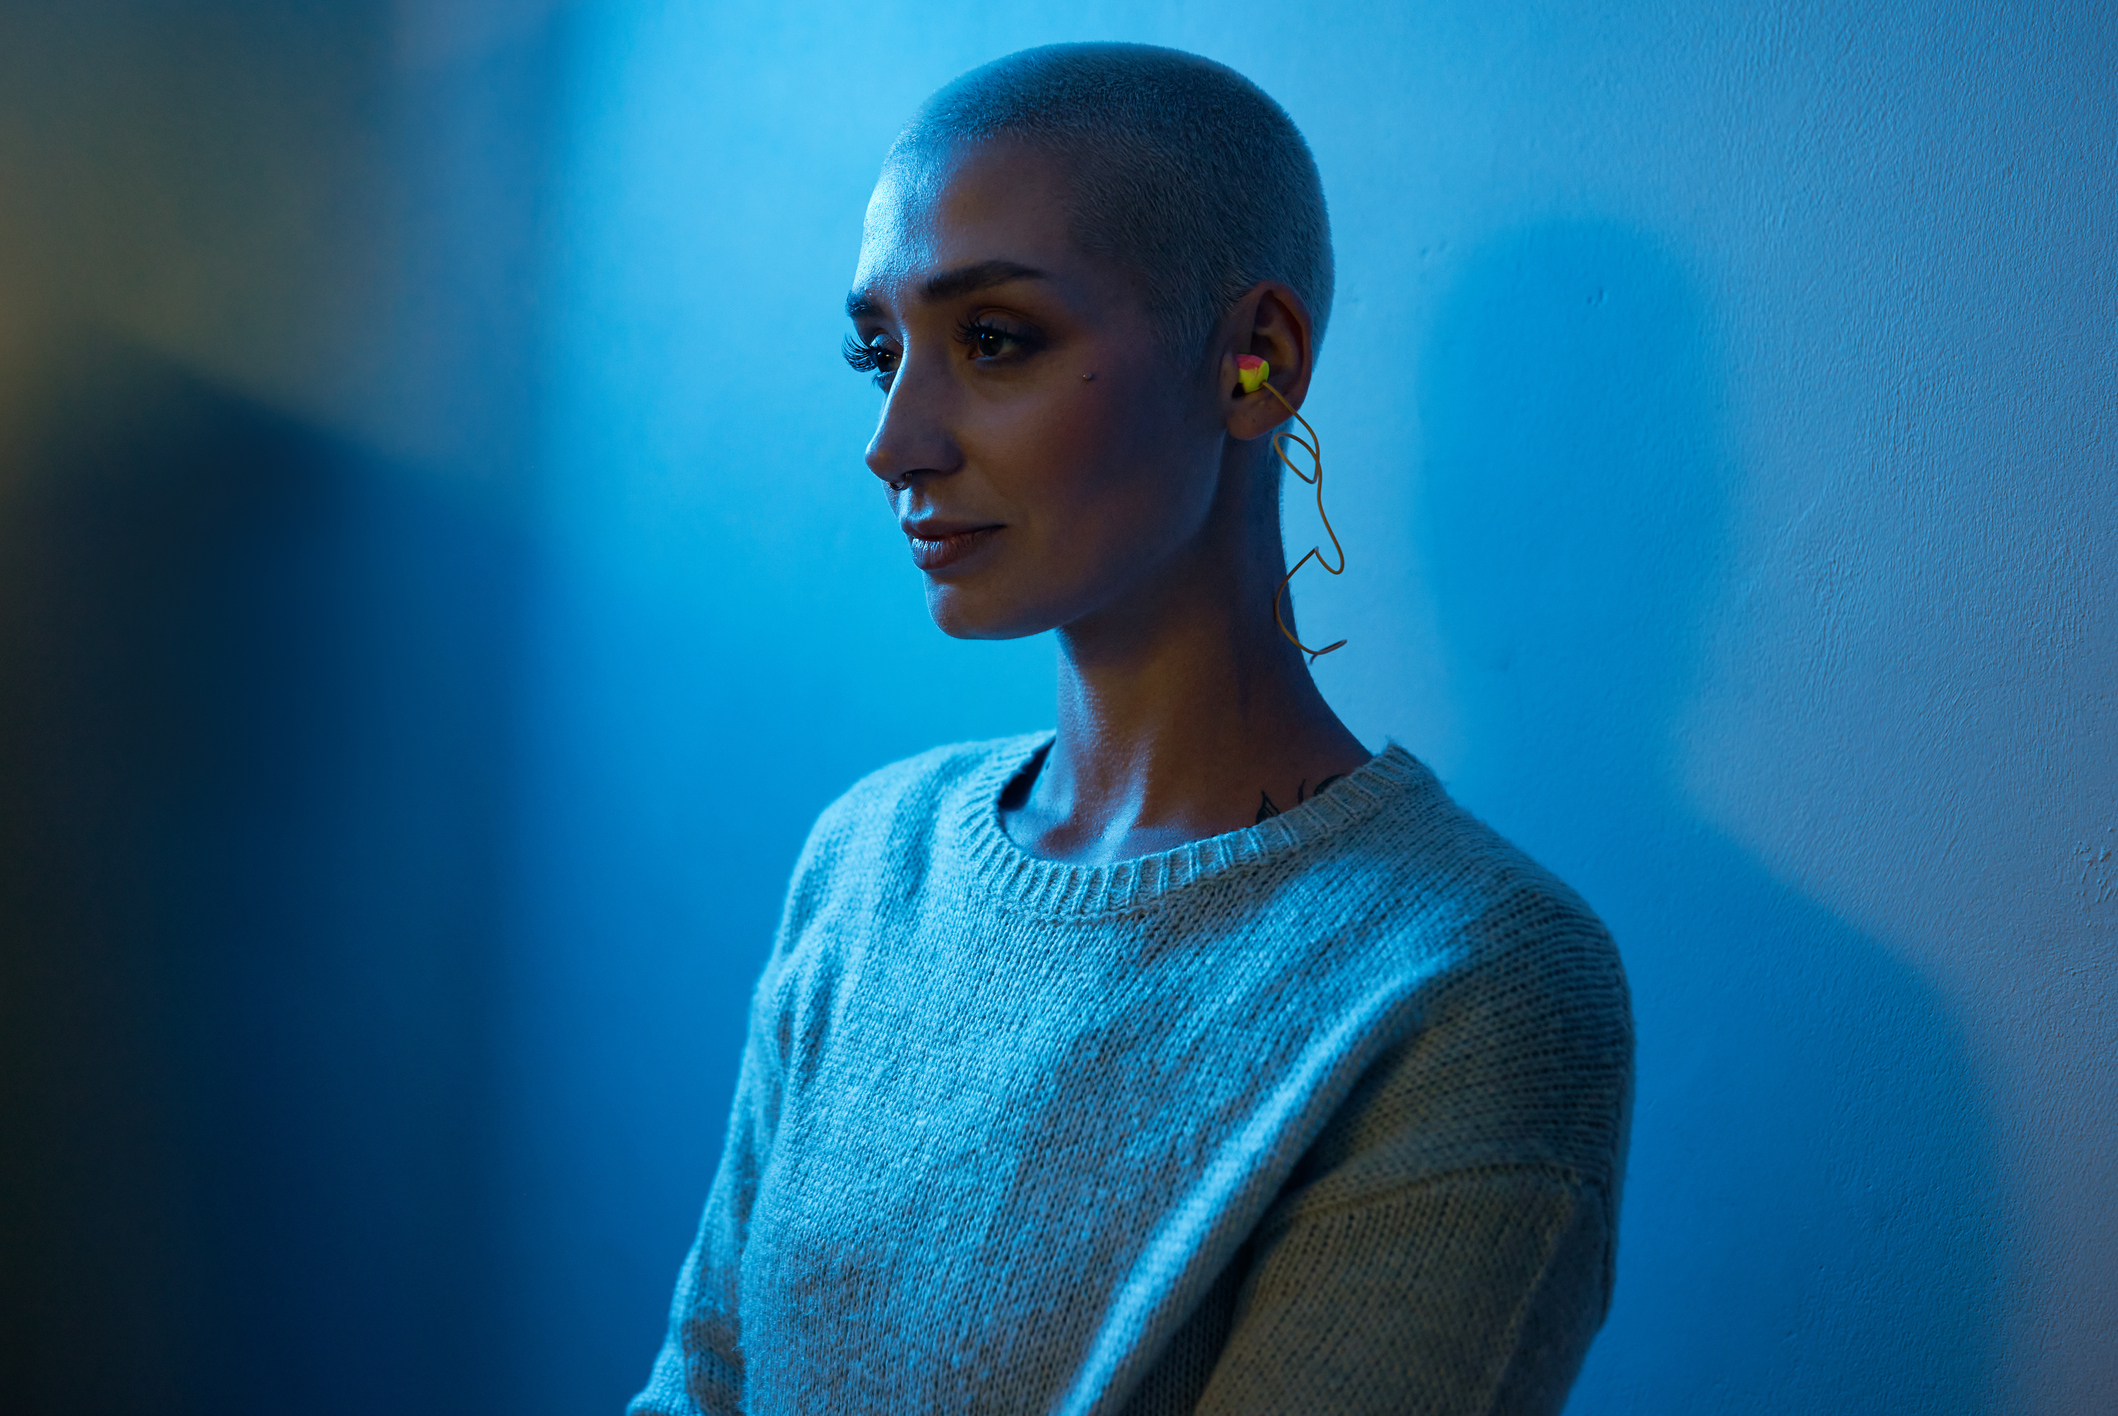 Woman with a buzz cut wearing a sweater and hoop earrings, in side profile with soft lighting